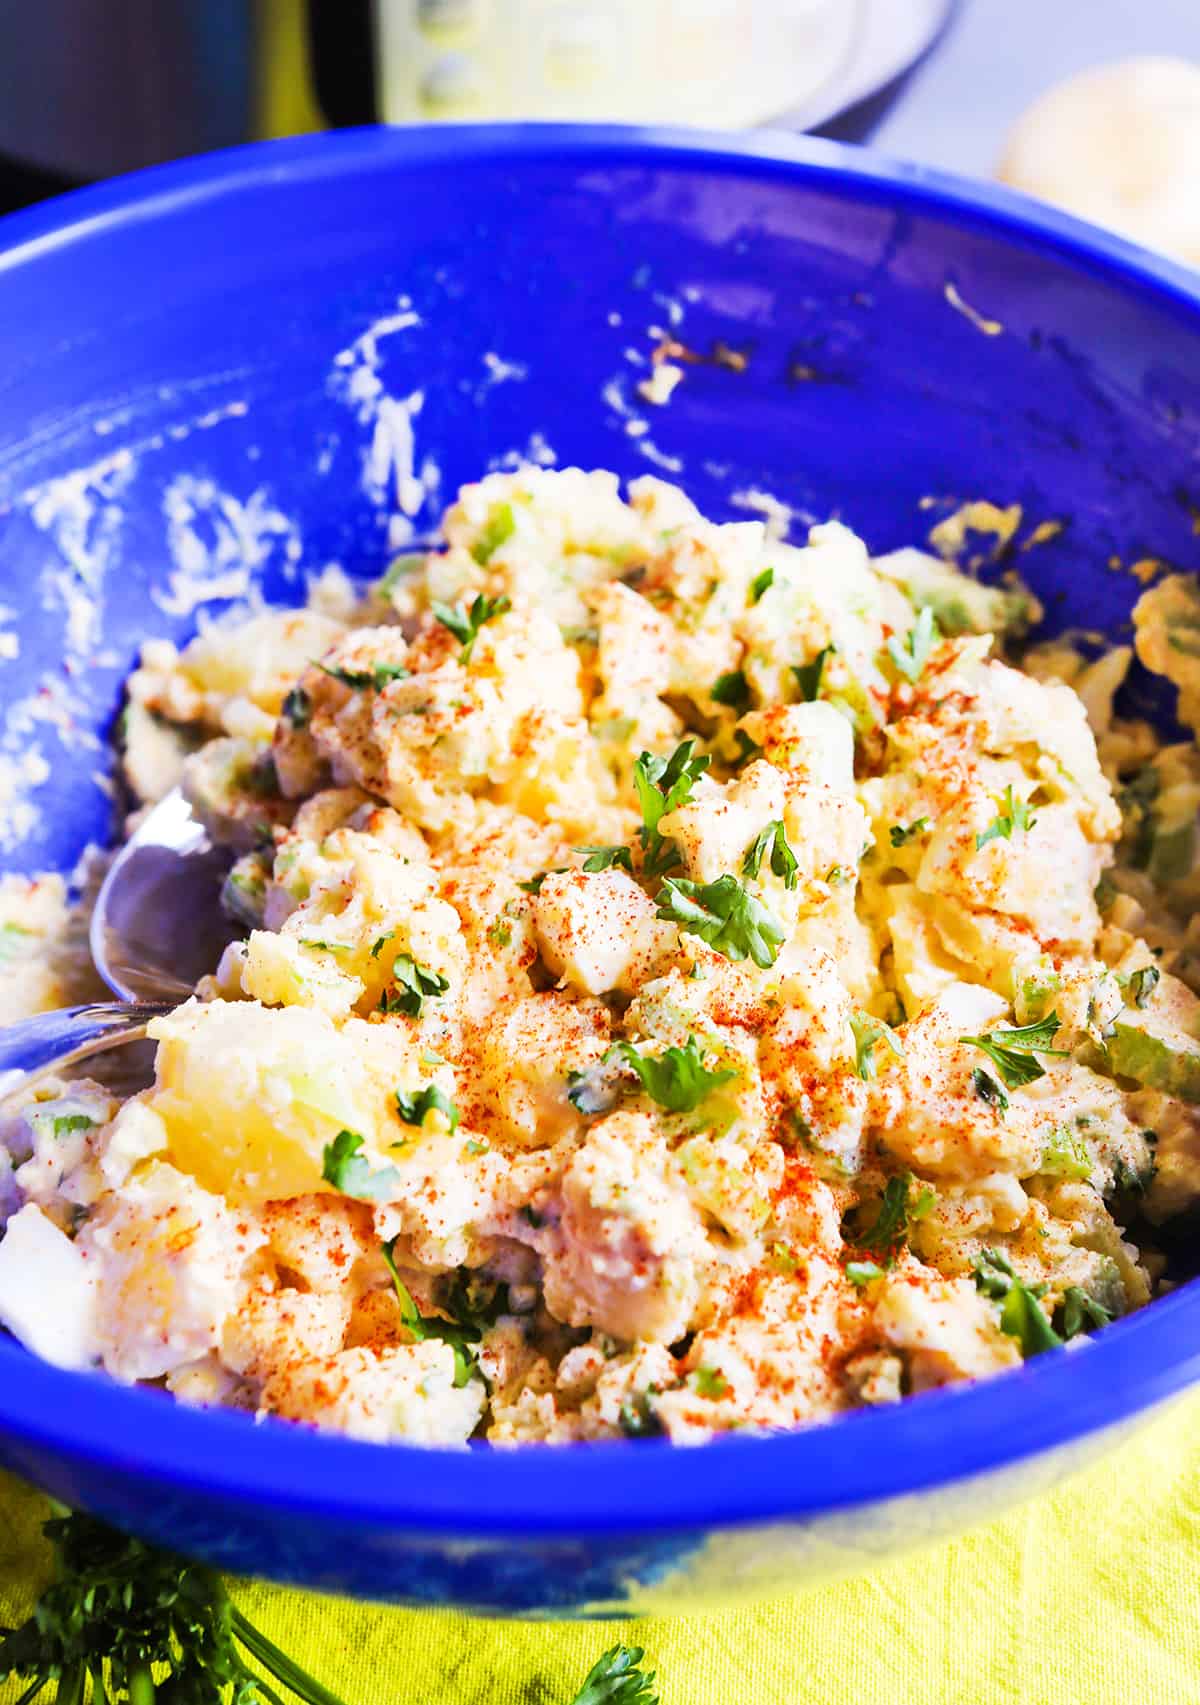 Blue mixing bowl filled with Instant Pot potato salad.